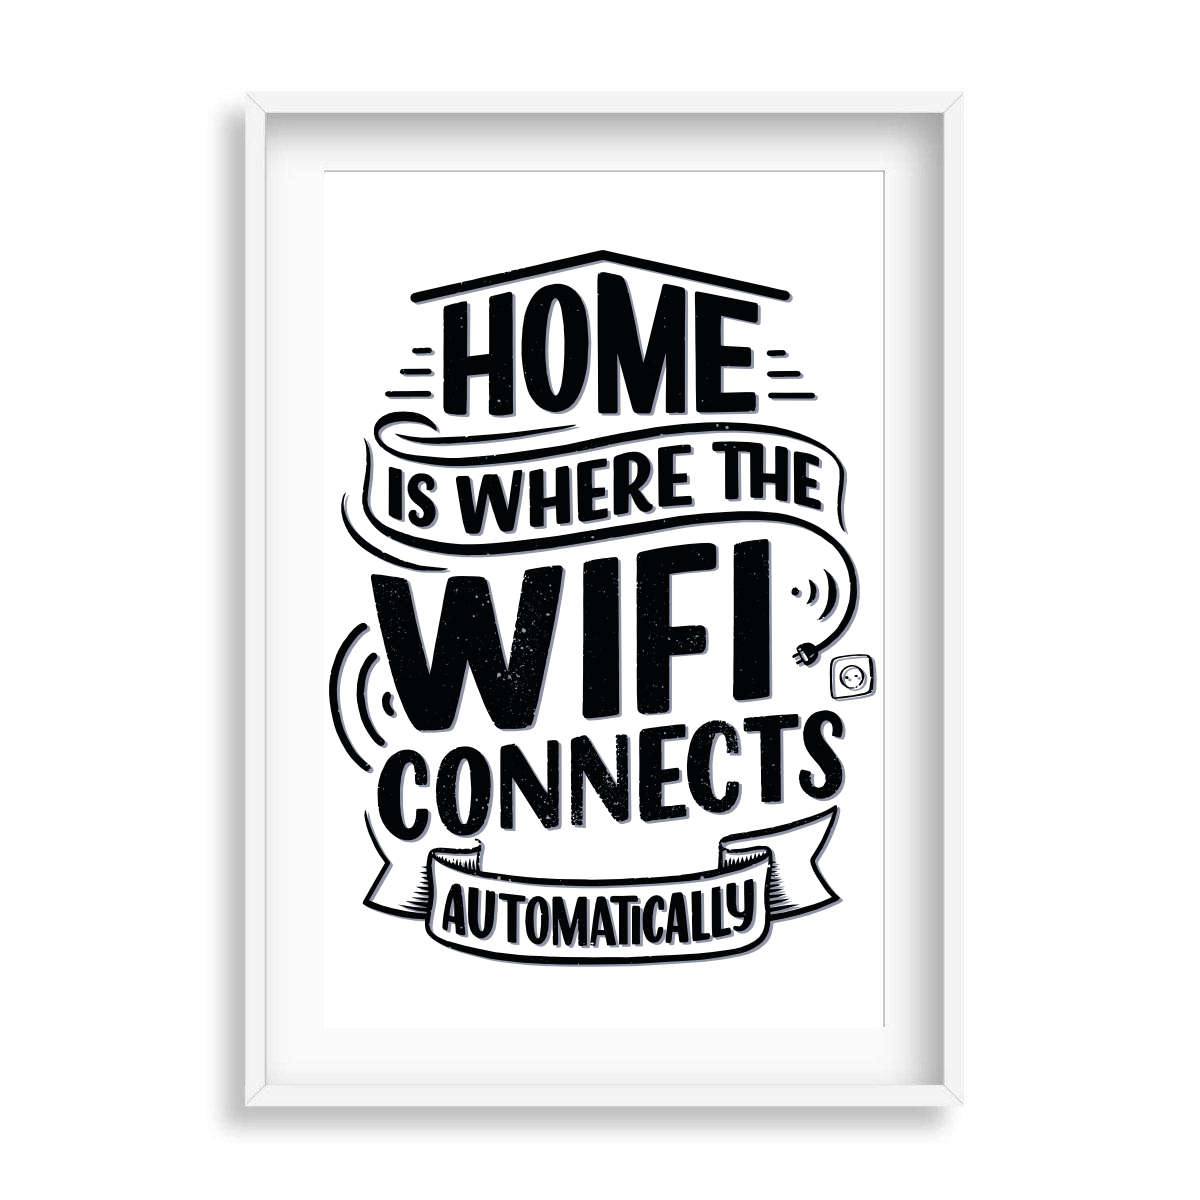 Home Is Where The Wifi Connects Automatically Wall Print - Printibly